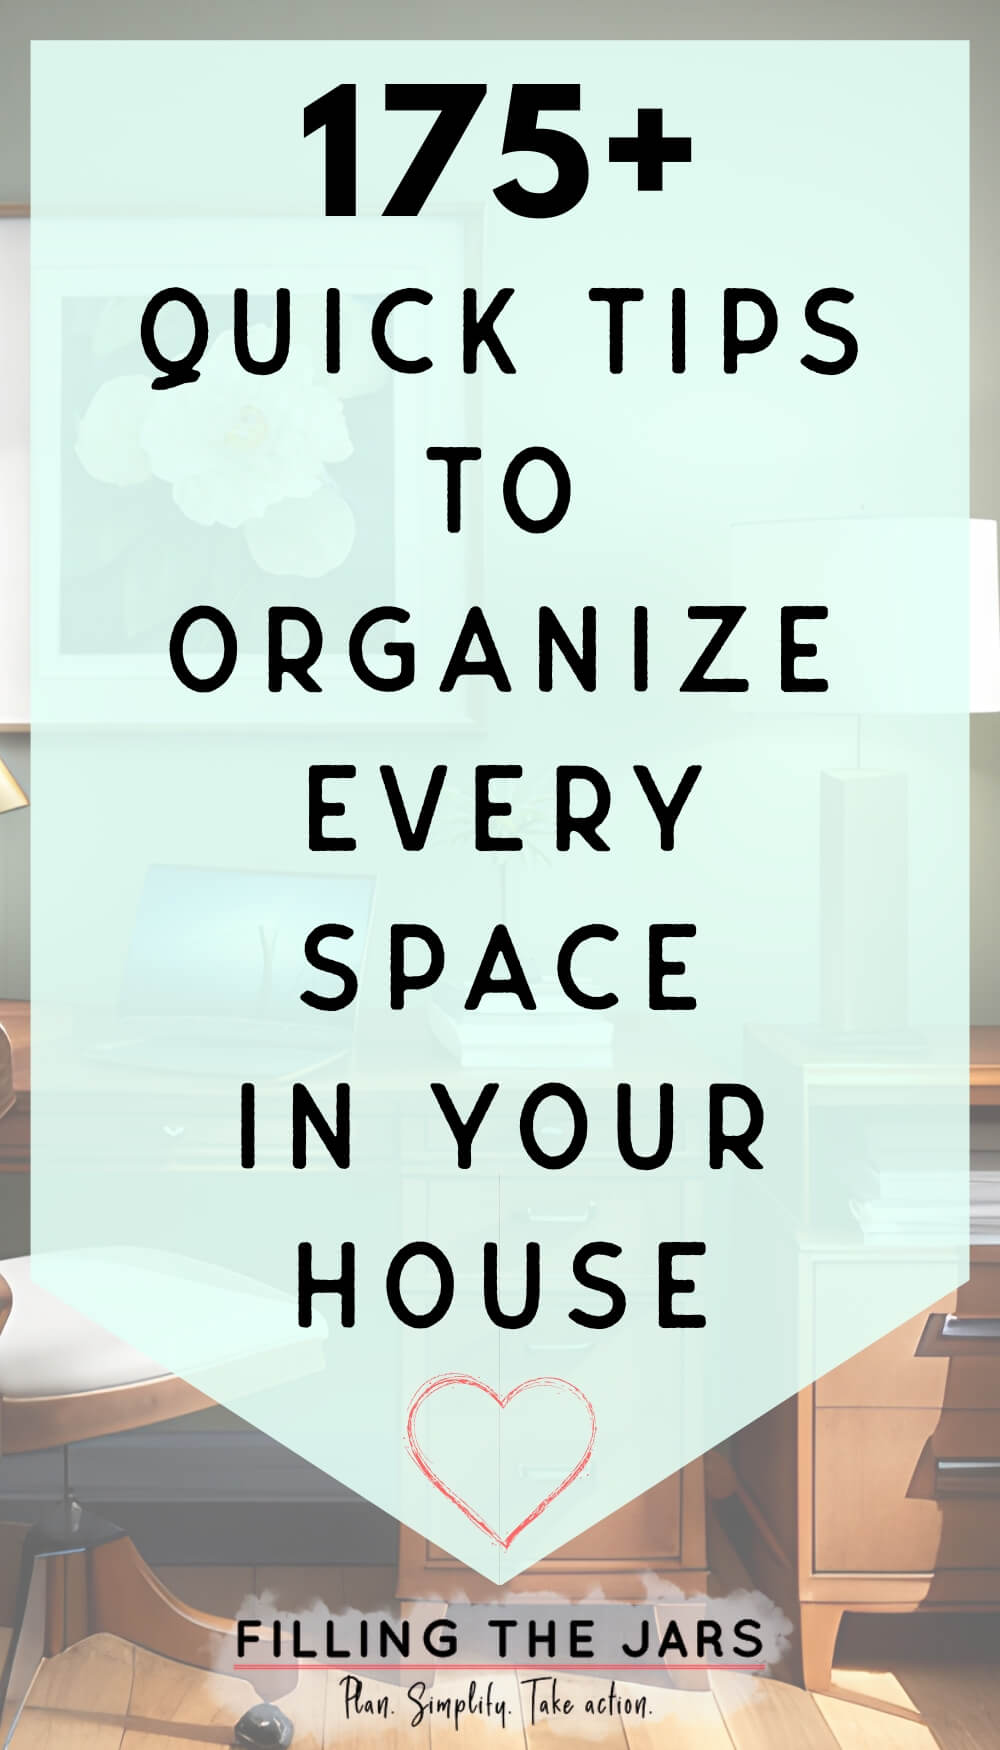 Text 175 quick tips to organize every space in your house on light turquoise background over faded image of organized desk.